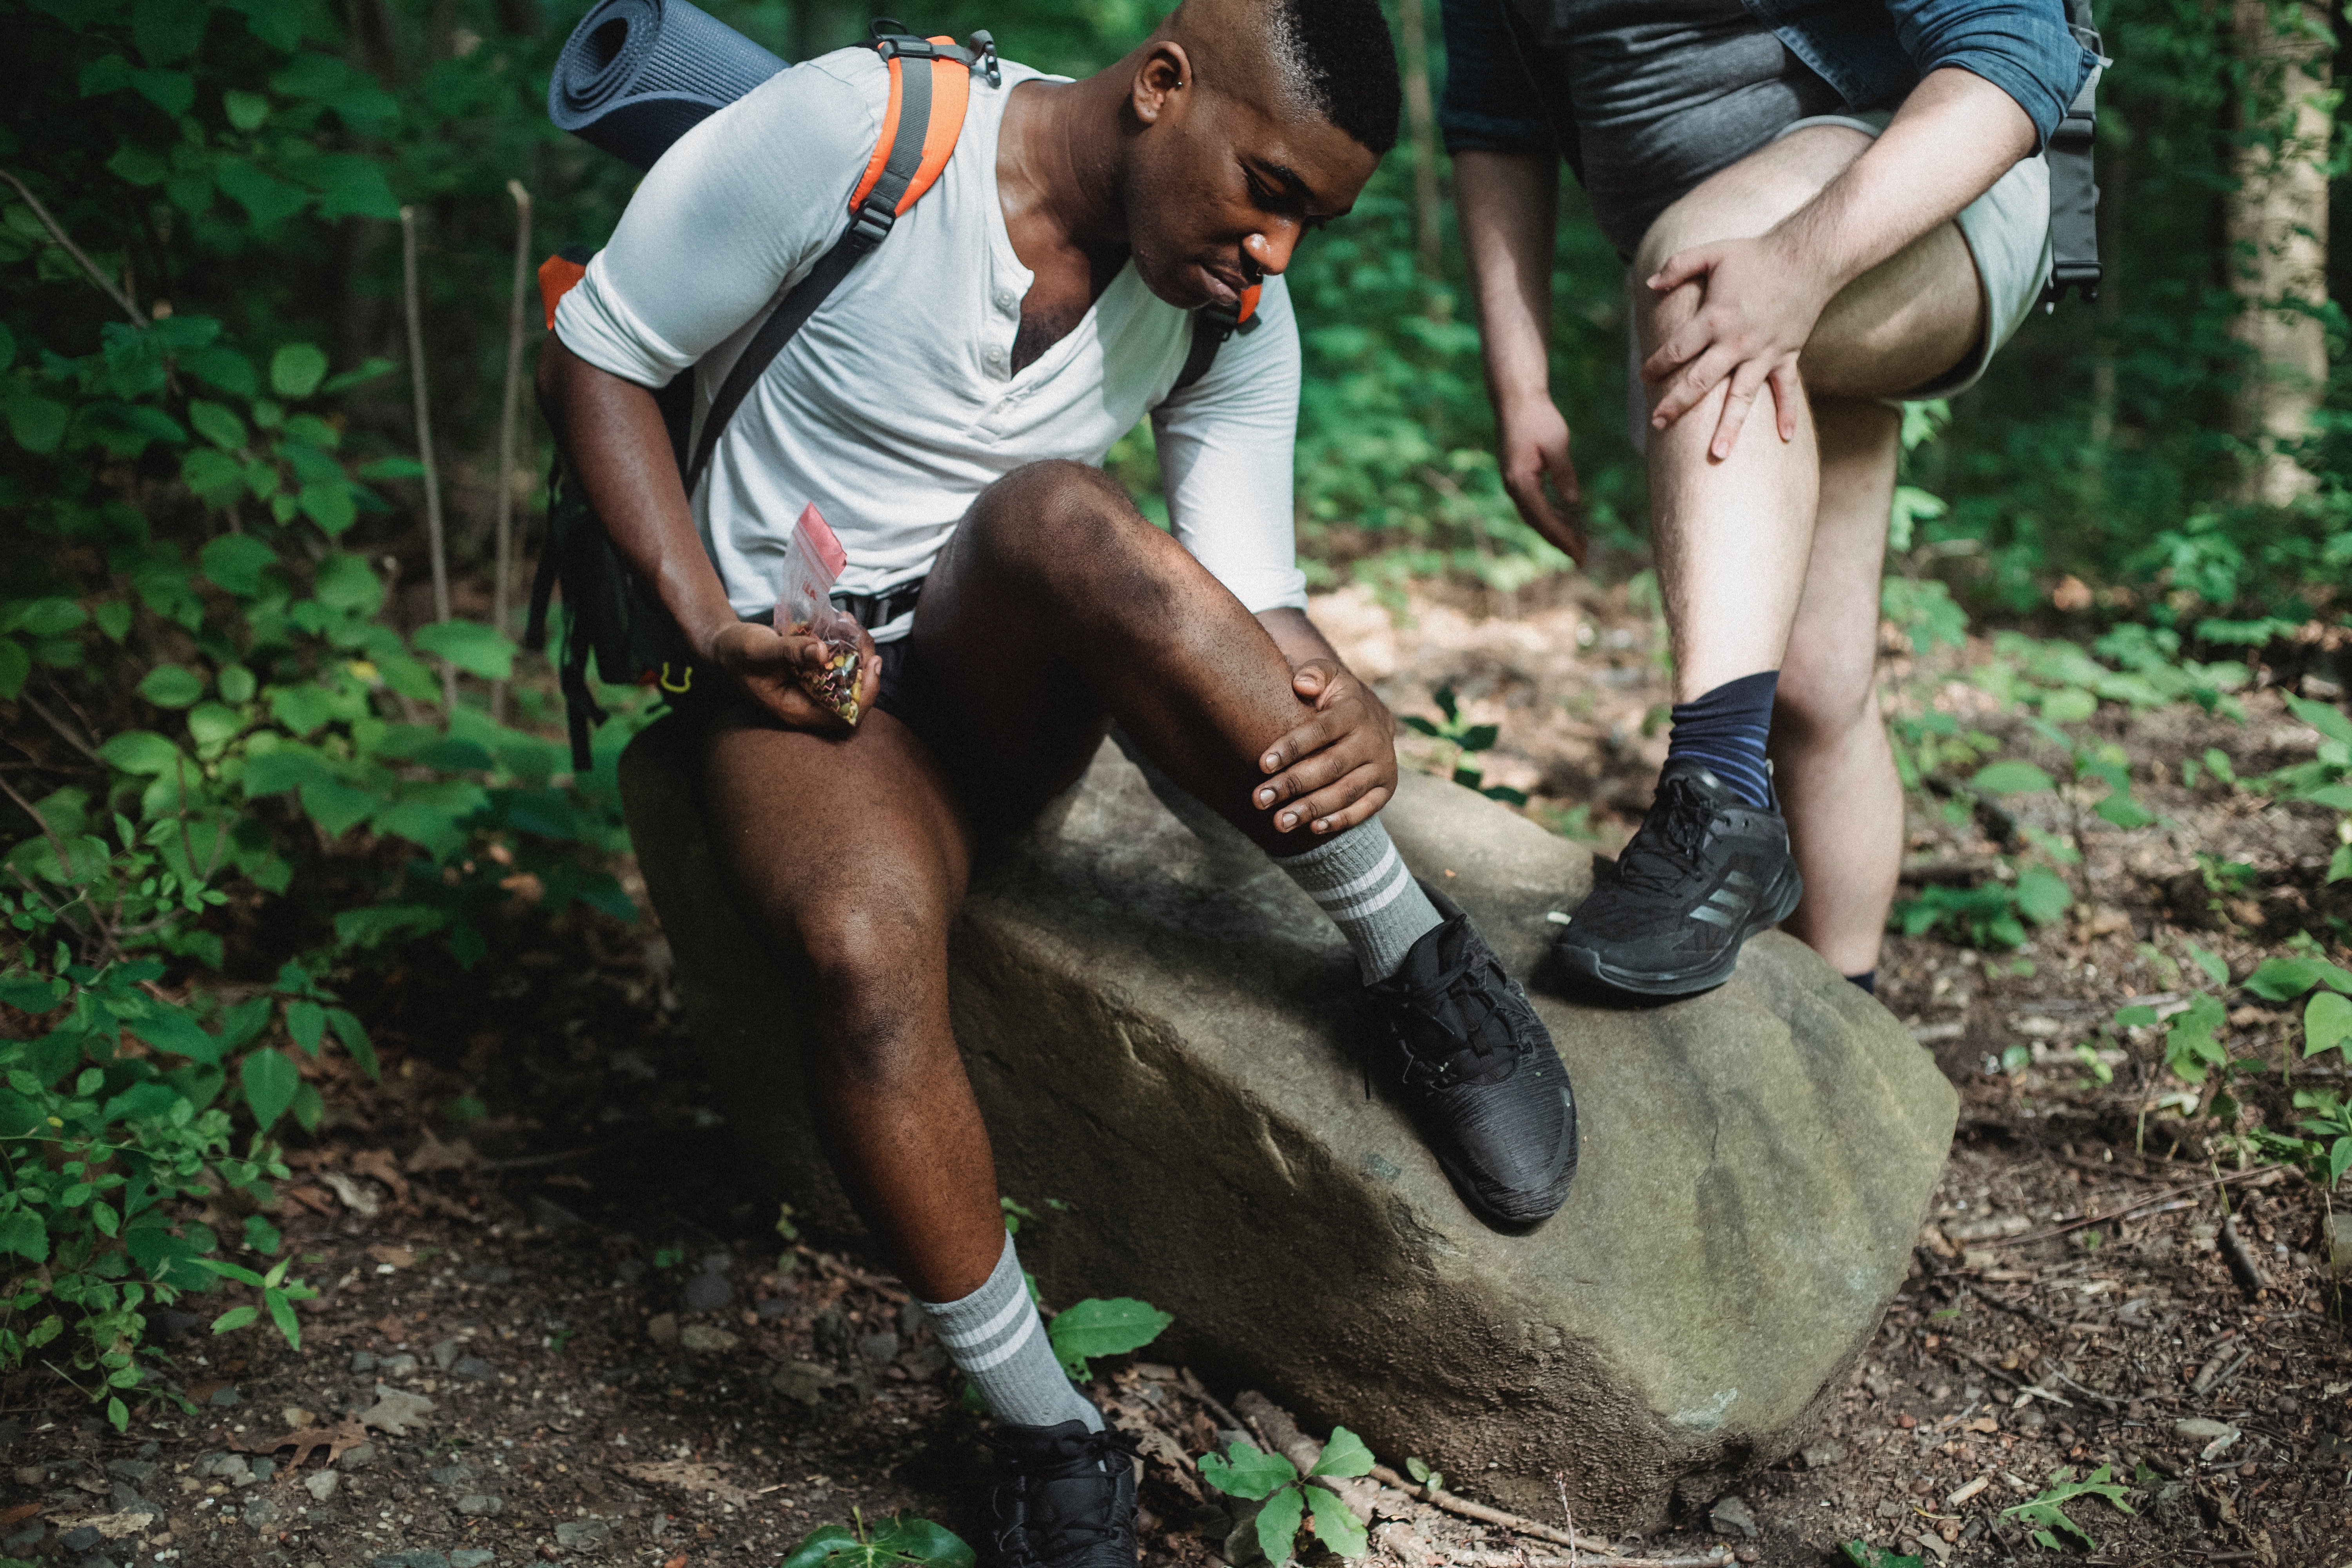 Pictured - Two males checking acari during hike in the forest | Source: Pexels 